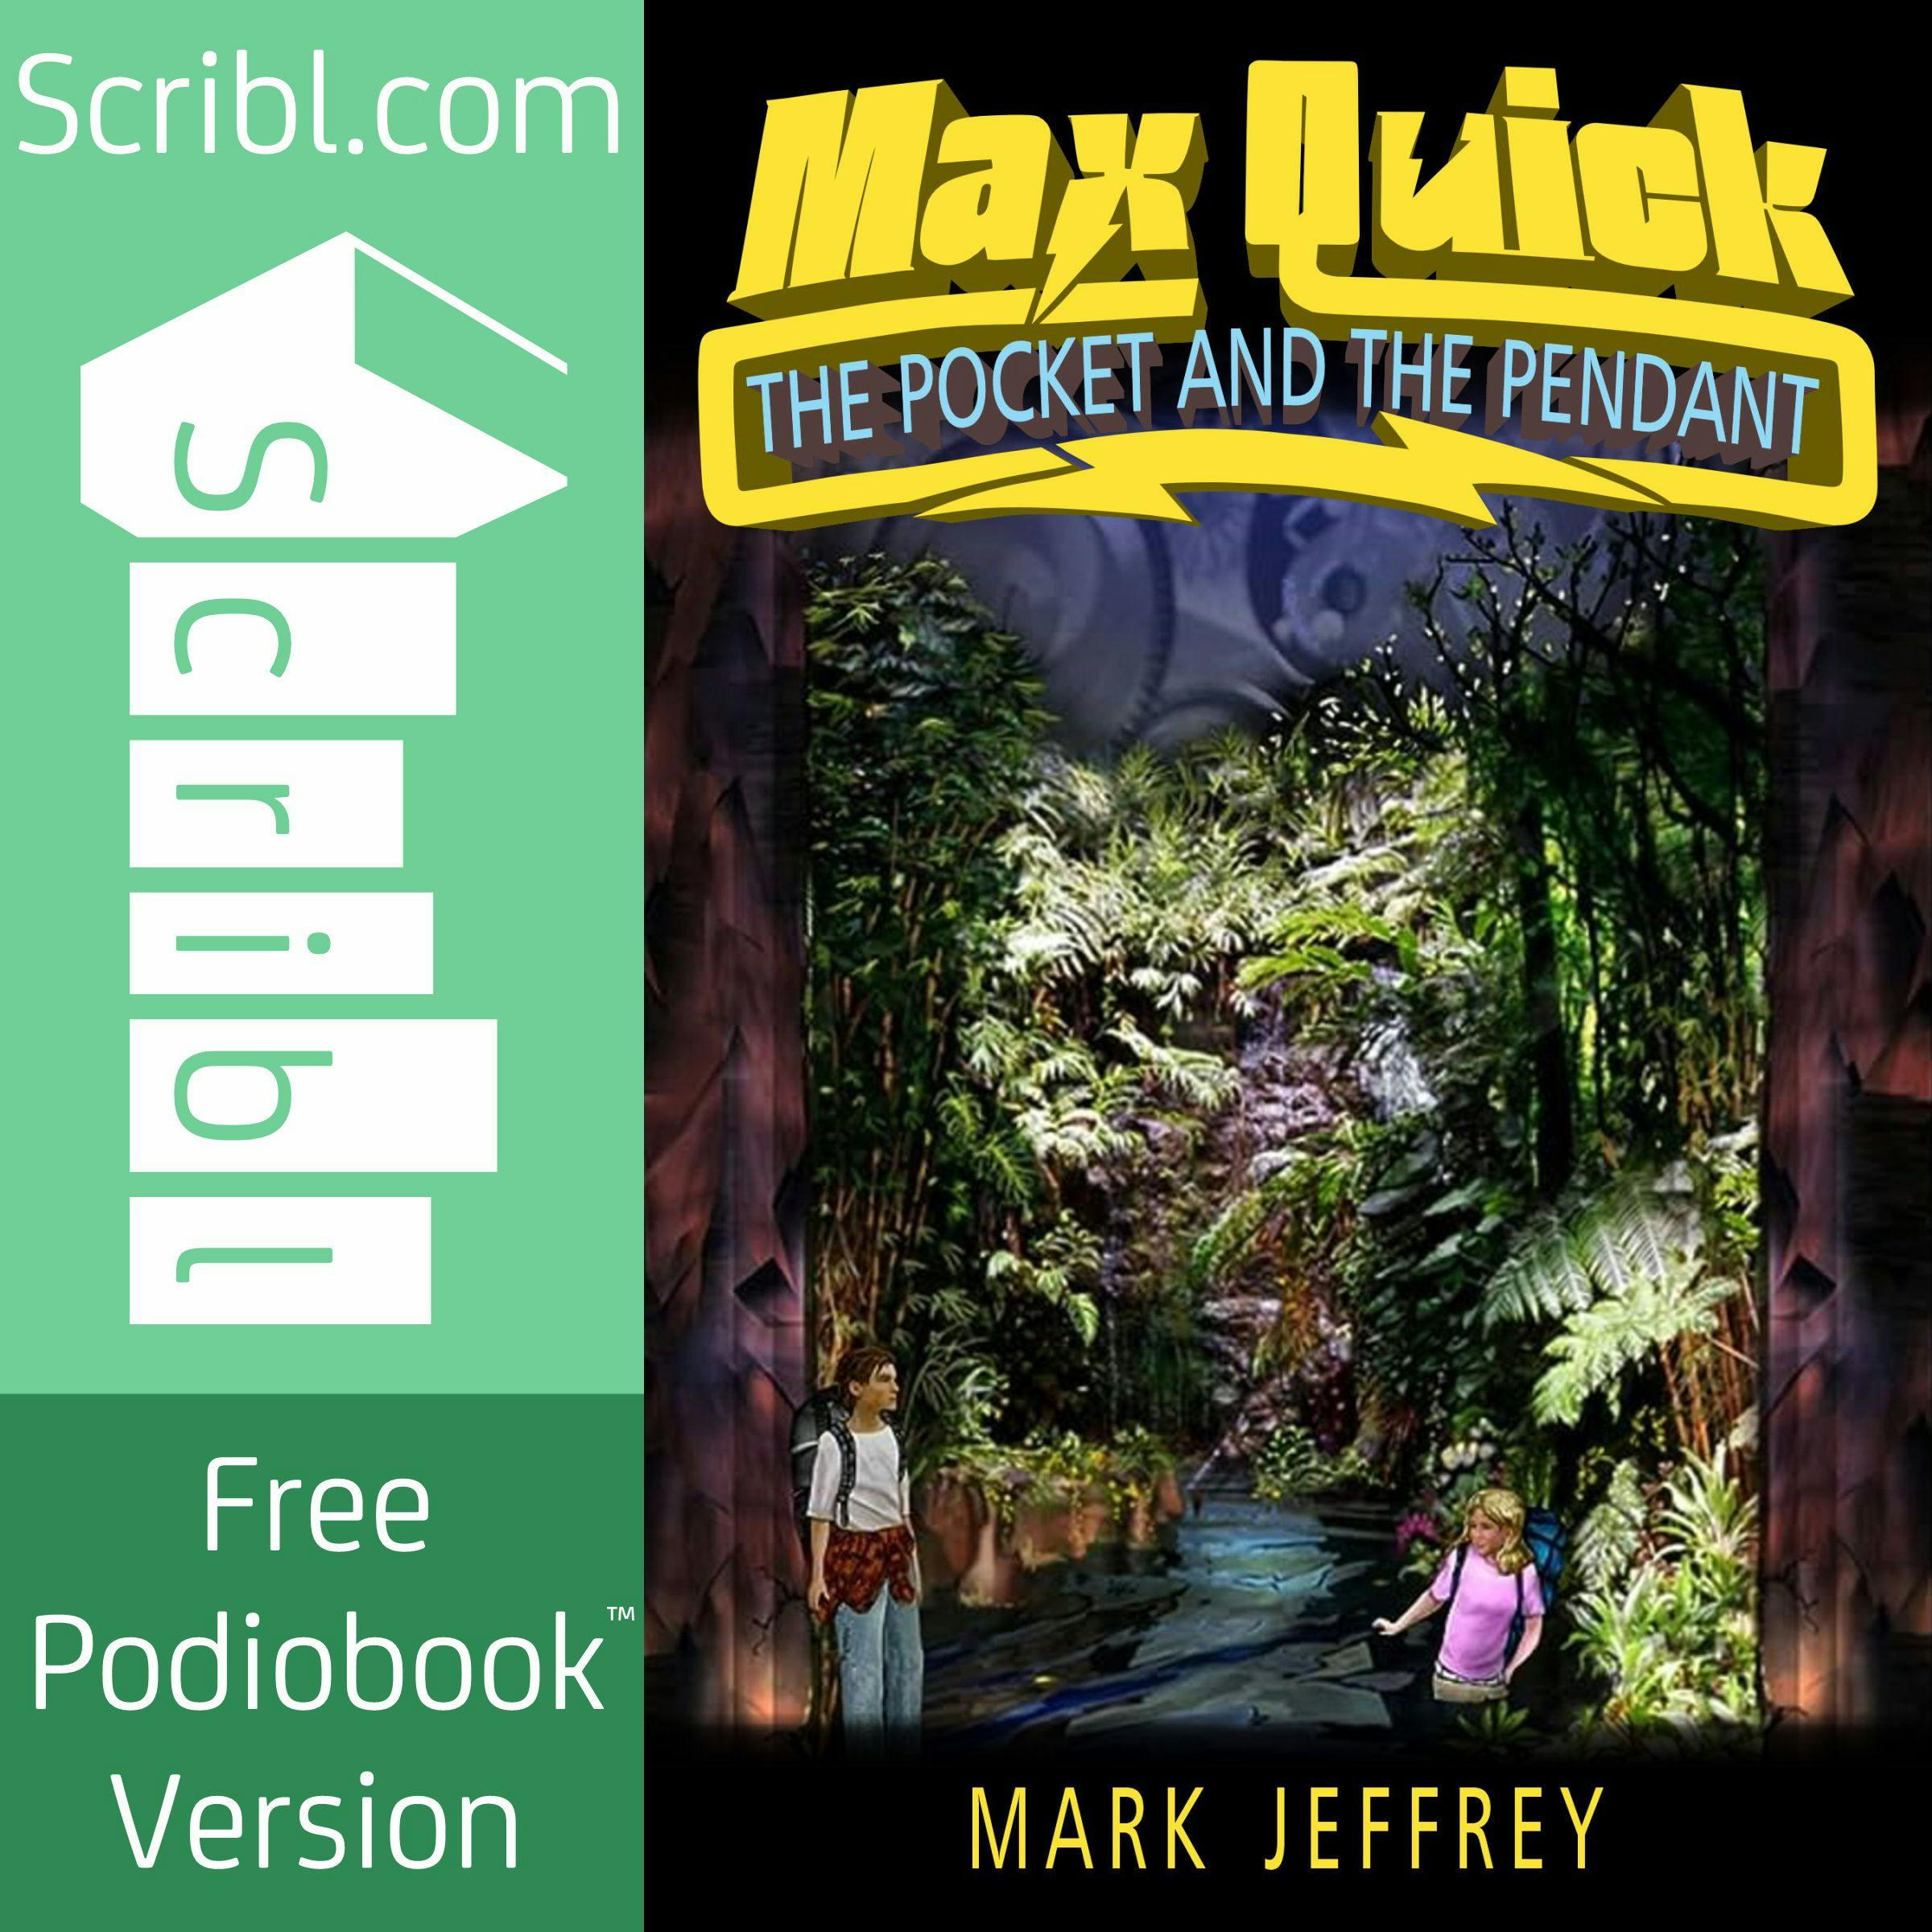 Max Quick 1: The Pocket and the Pendant:Mark Jeffrey | Scribl